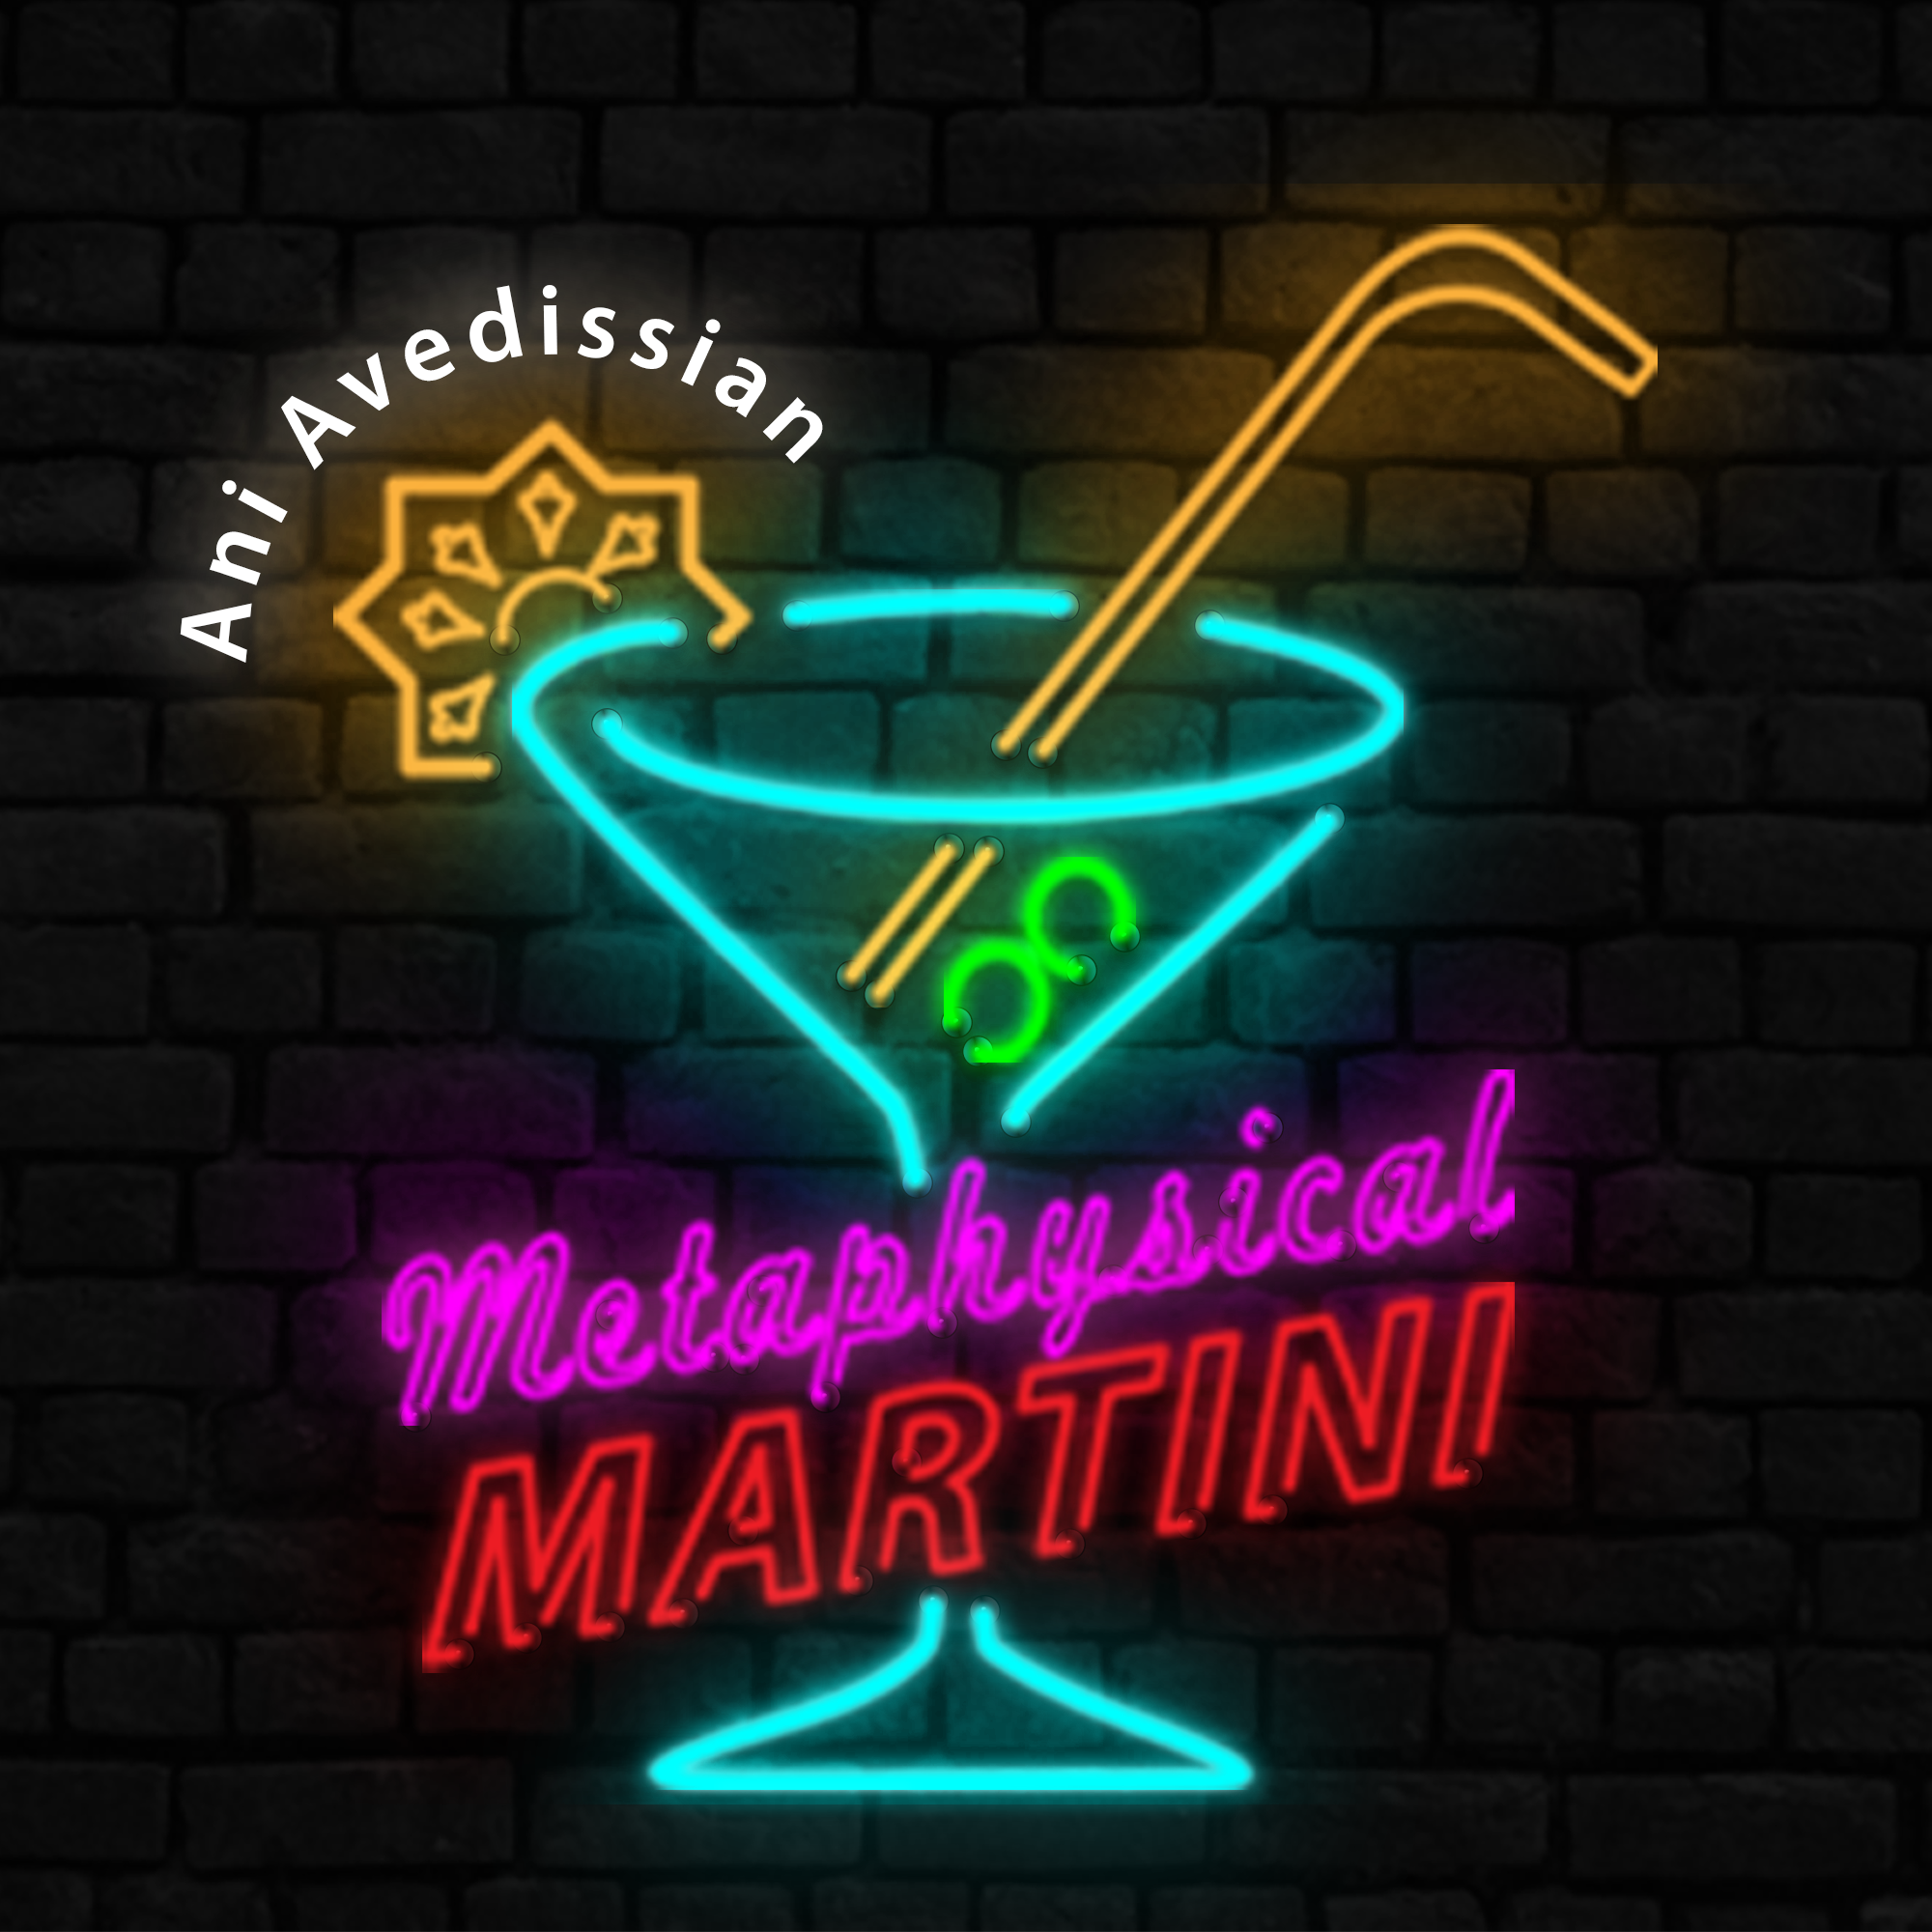 "Metaphysical Martini"   12/22/2021  Ani's Christmas & Solstice Special - Prepare your puddings!